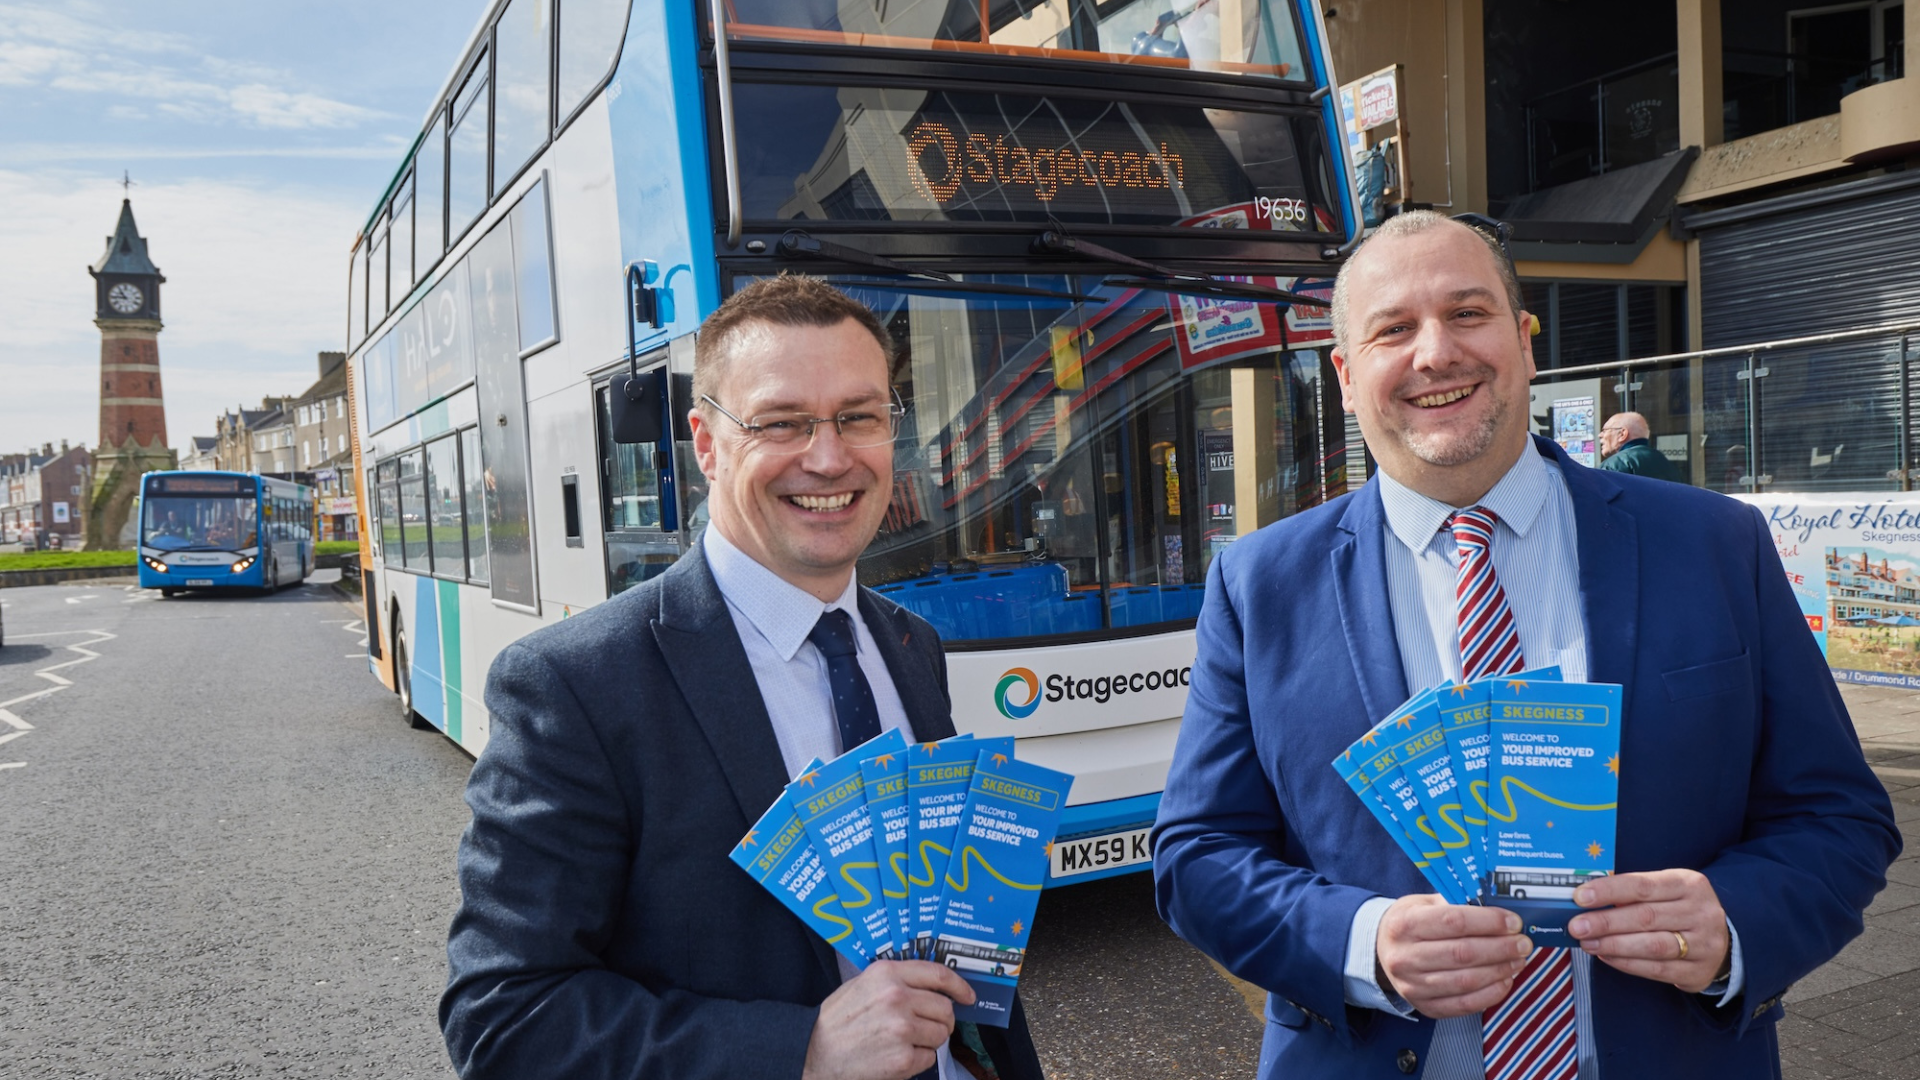 Cllr Carl Macey, local member for Skegness, and Matt Cranwell, Managing Director of Stagecoach East Midlands, pictured in front of one of the Skegness buses.